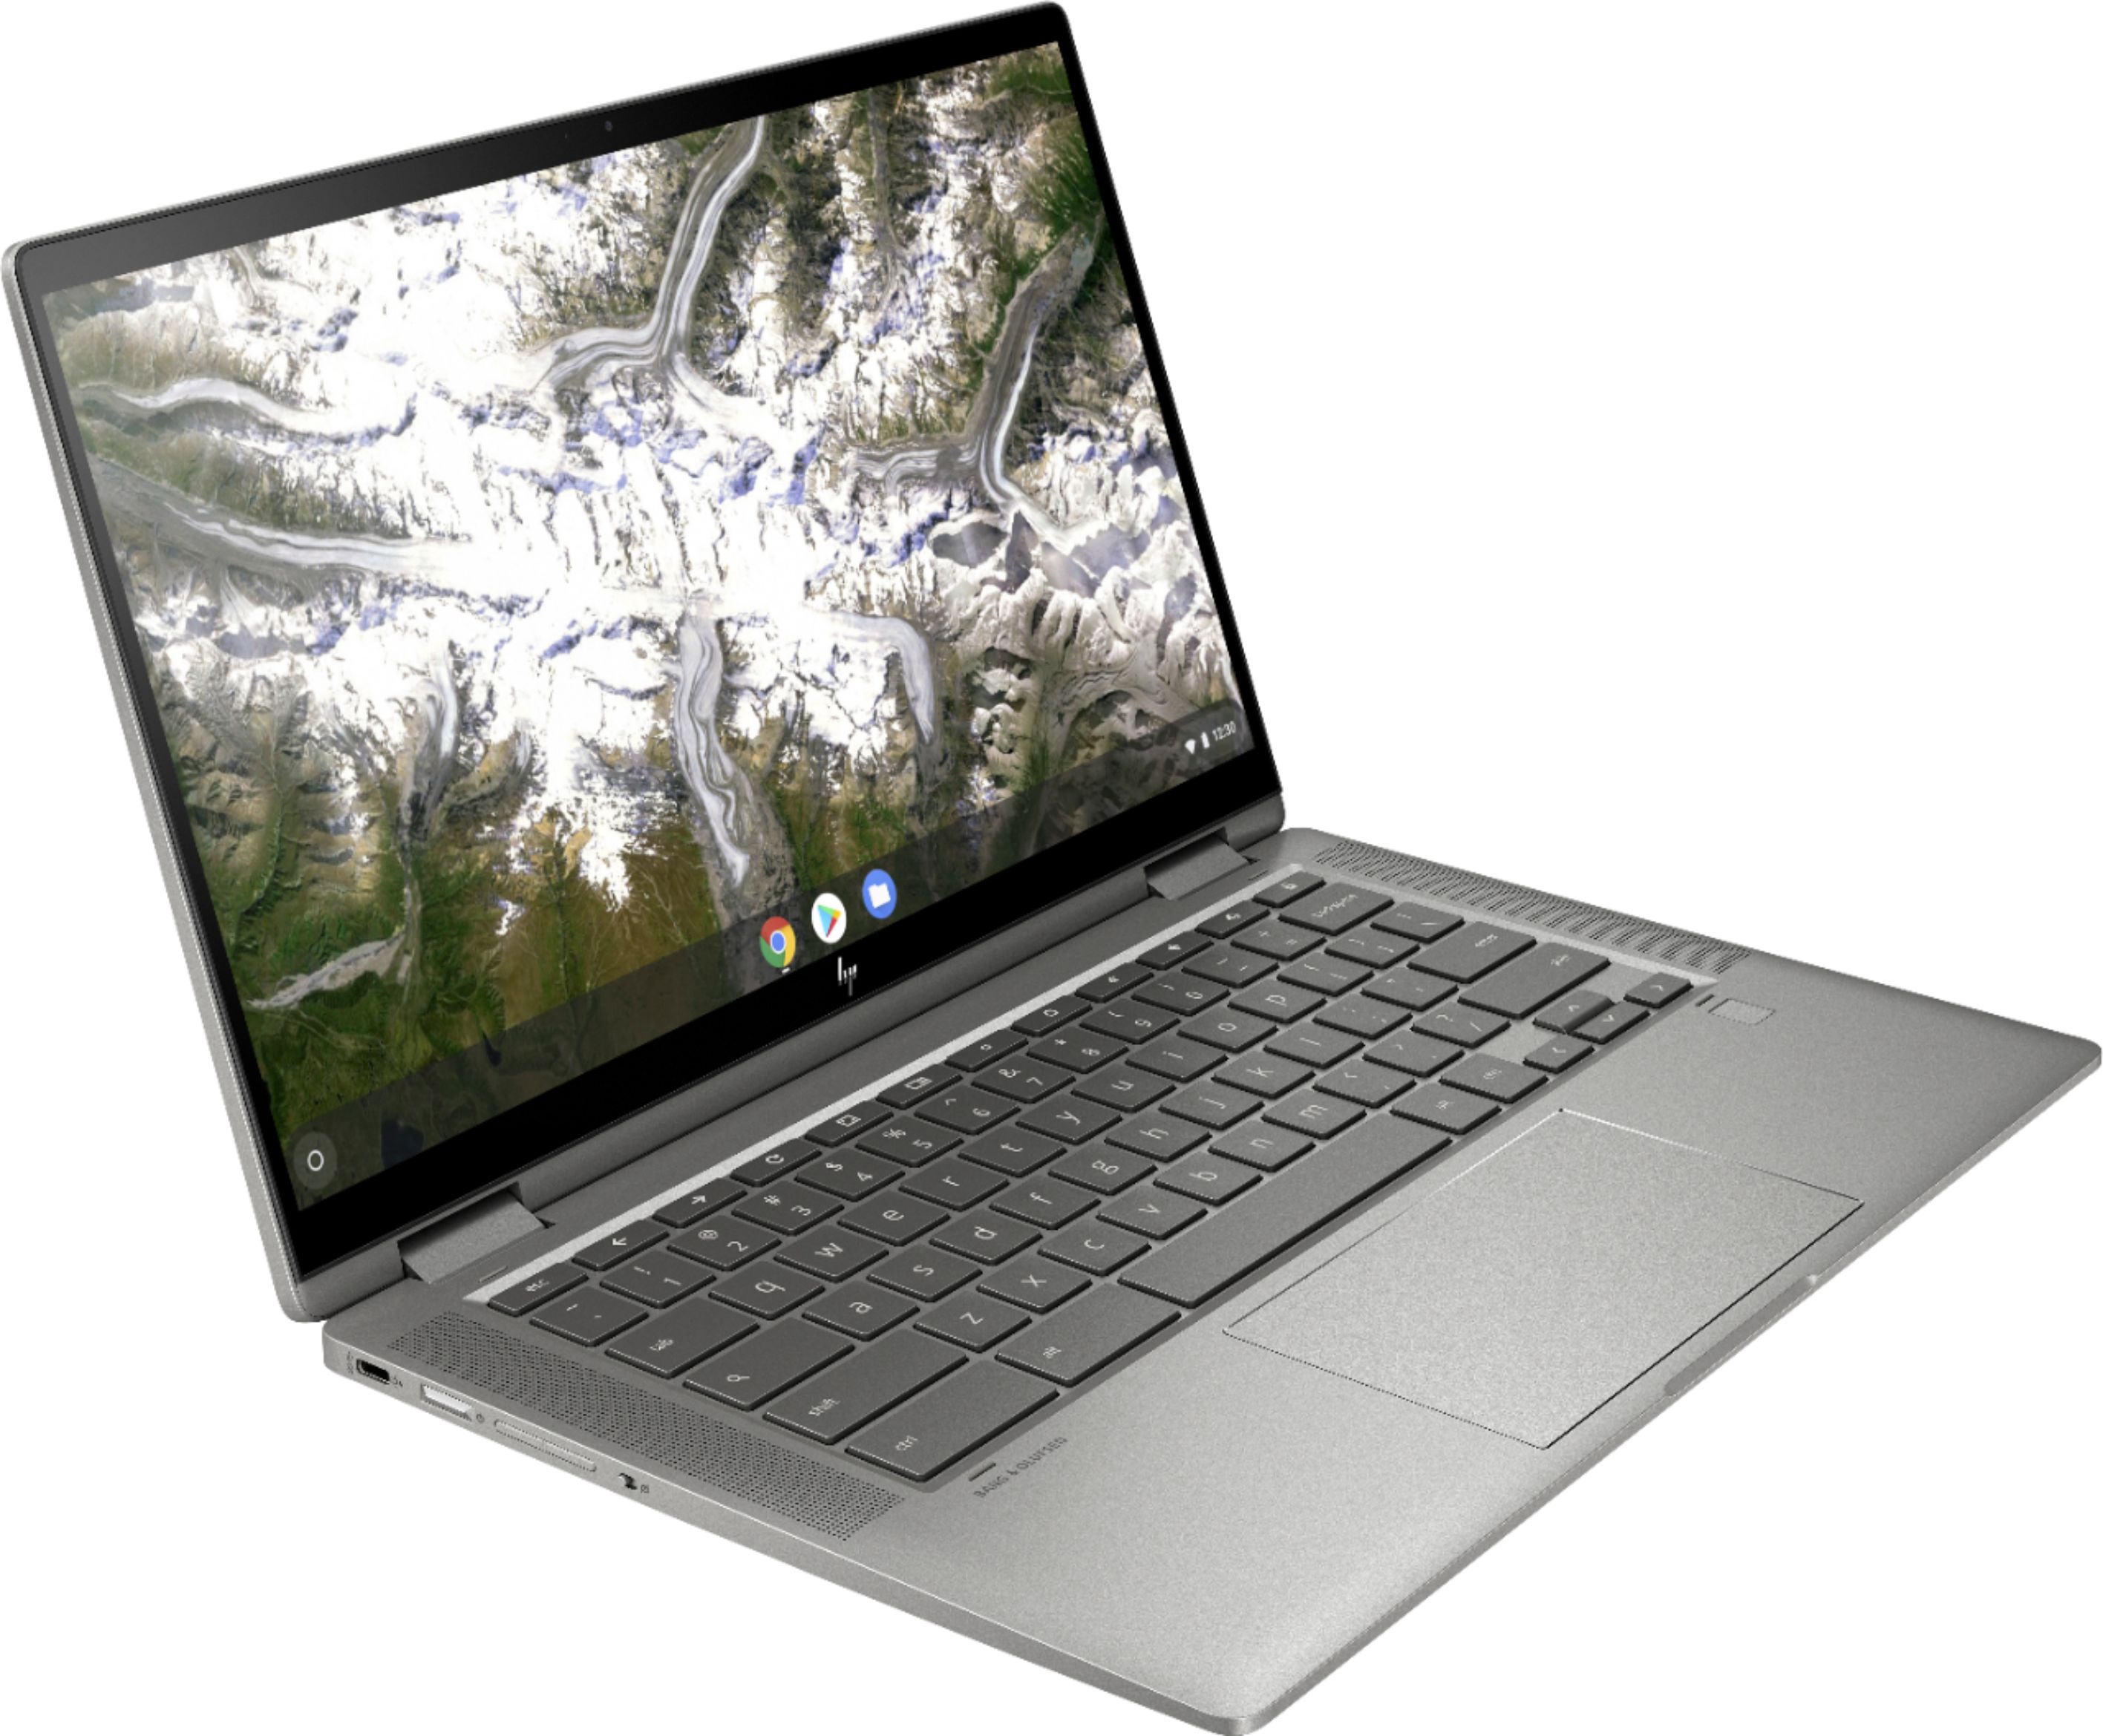 HP Chromebook X360 14c sale drops $629 regular price to a discounted $529